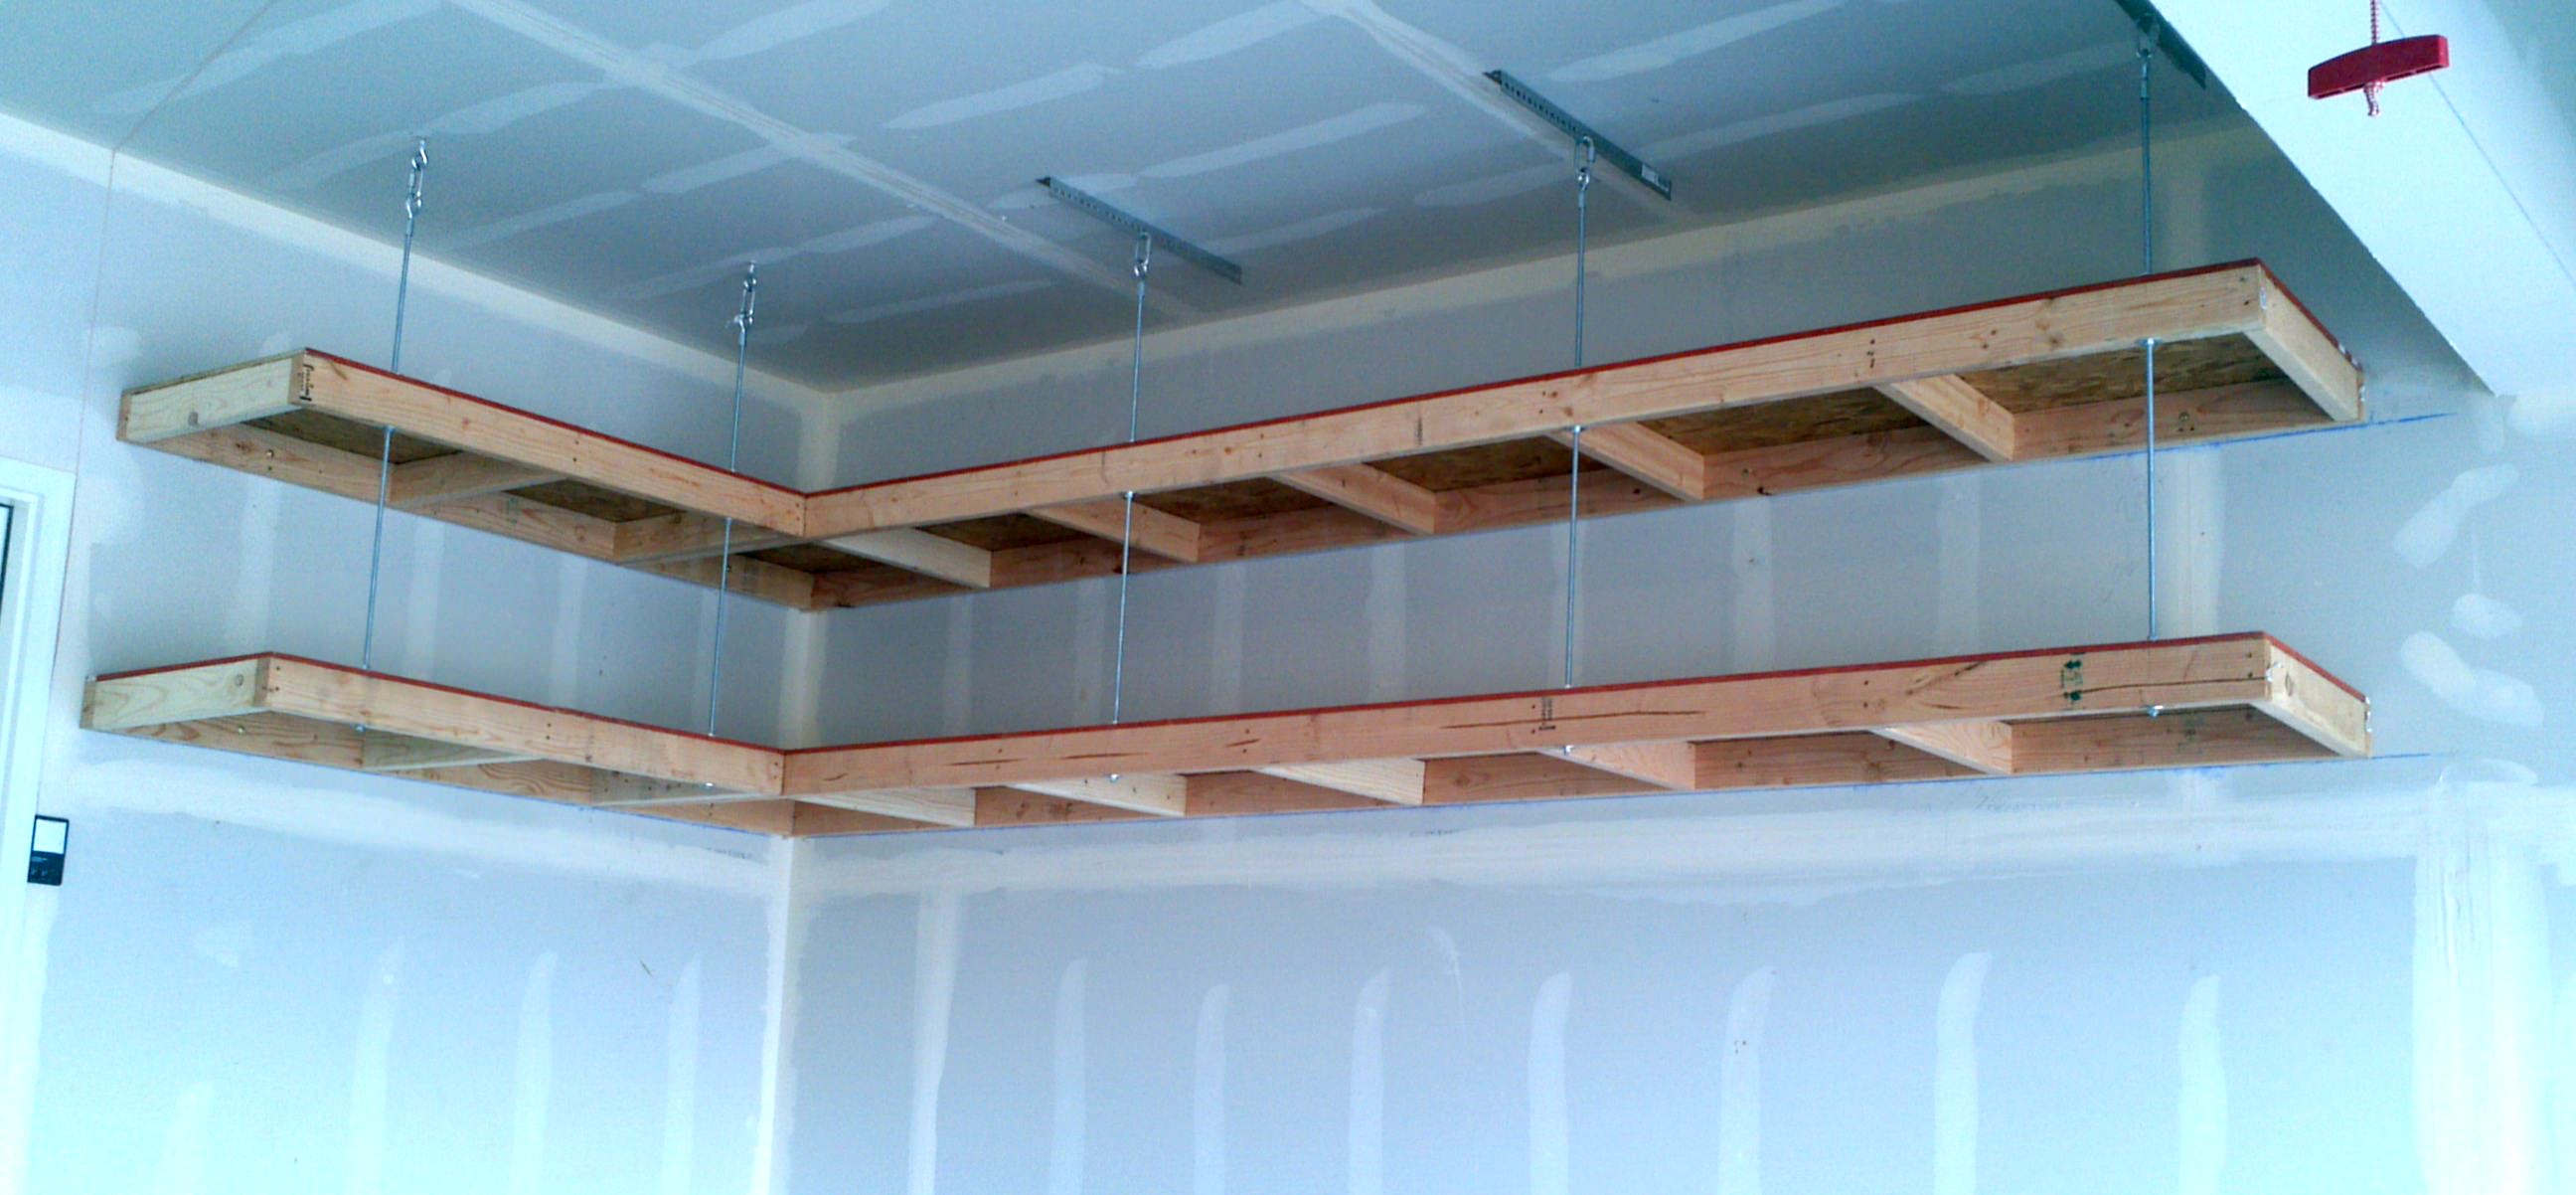 How to Build Hanging Shelves